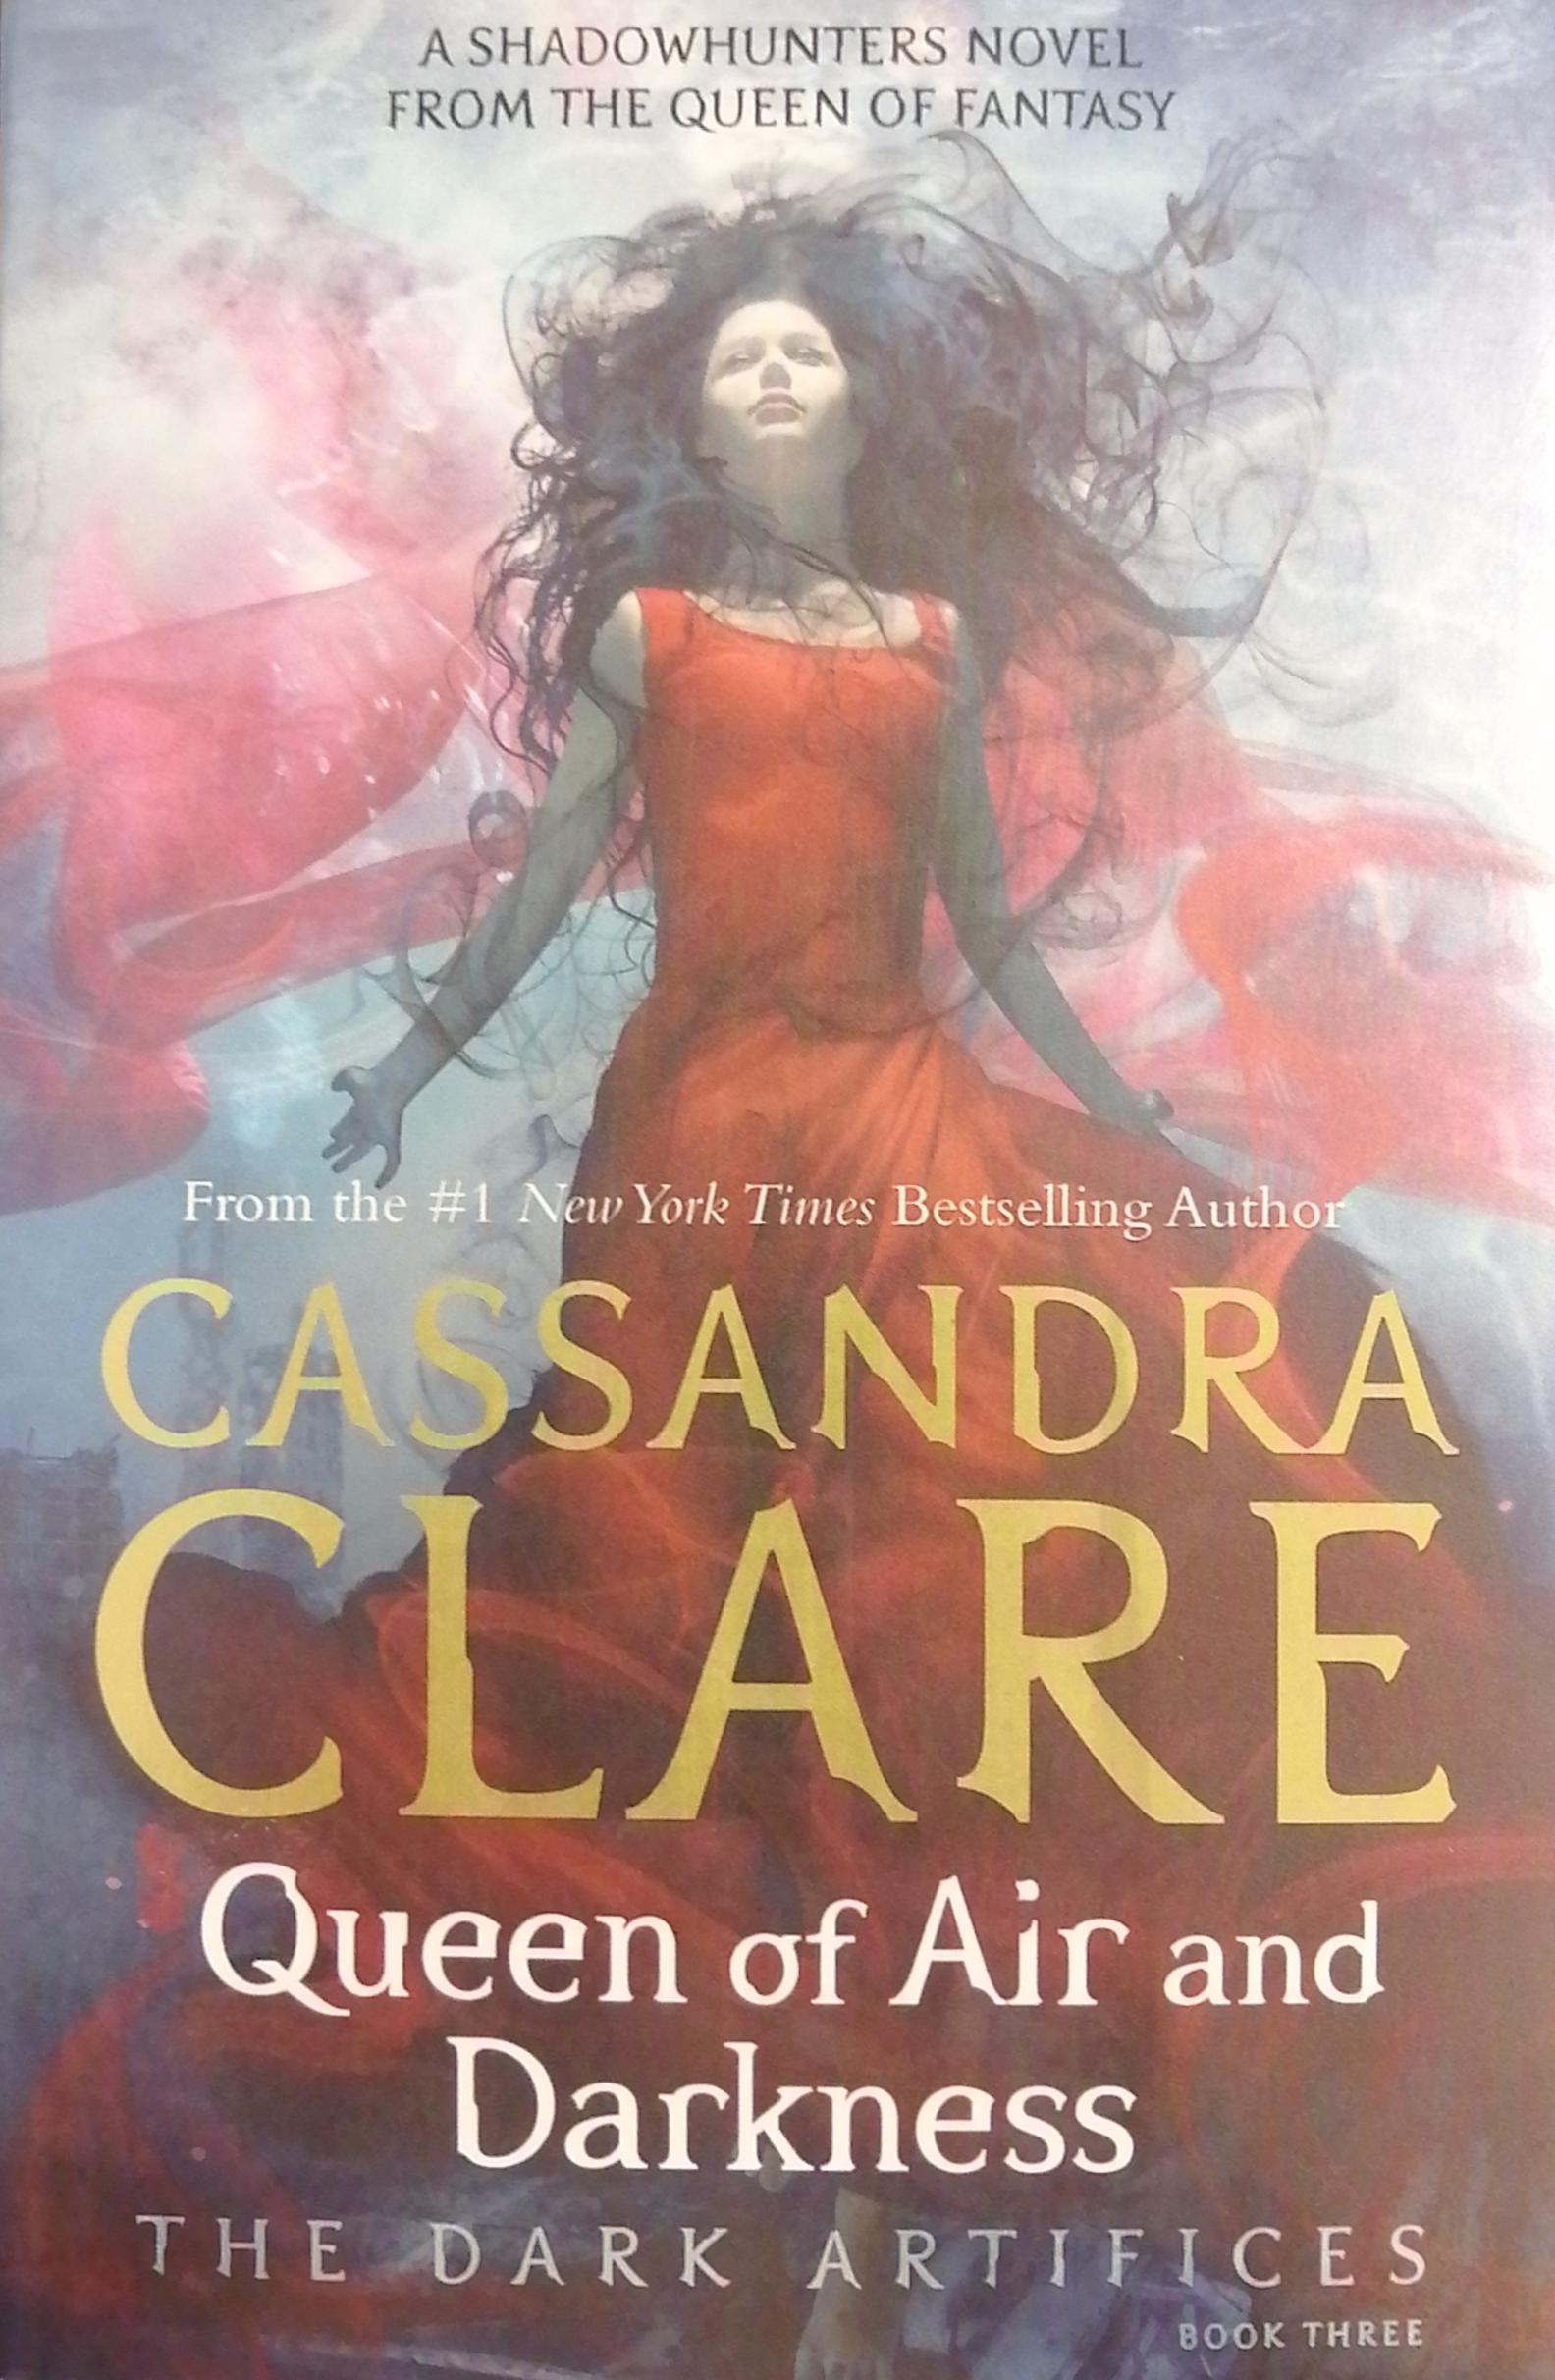 The Mortal Instruments : The Dark Artifices Book 3 : Queen of Air and Darkness Cassandra Clare